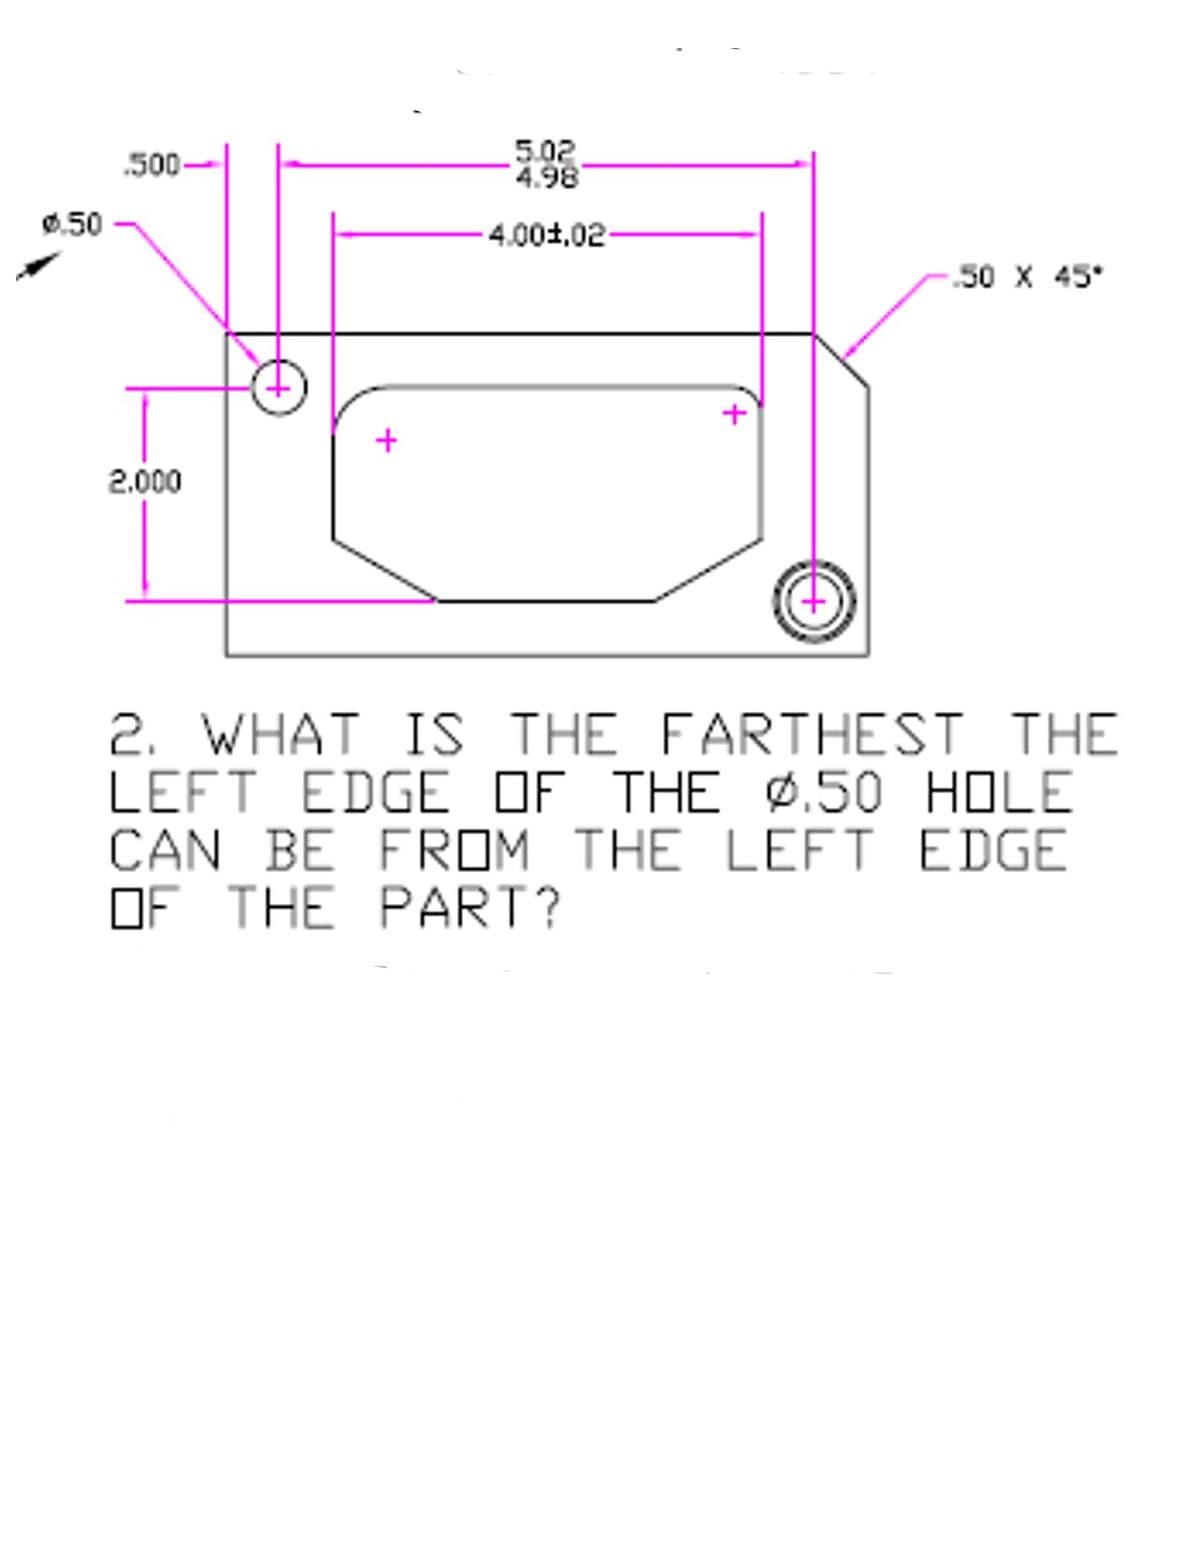 5.02
4.98
.500-
0.50
-4.00±,02-
50 X 45°
2.000
2. WHAT IS THE FARTHEST THE
LEFT EDGE OF THE Ø.50 HOLE
CAN BE FROM THE LEFT EDGE
OF THE PART?
